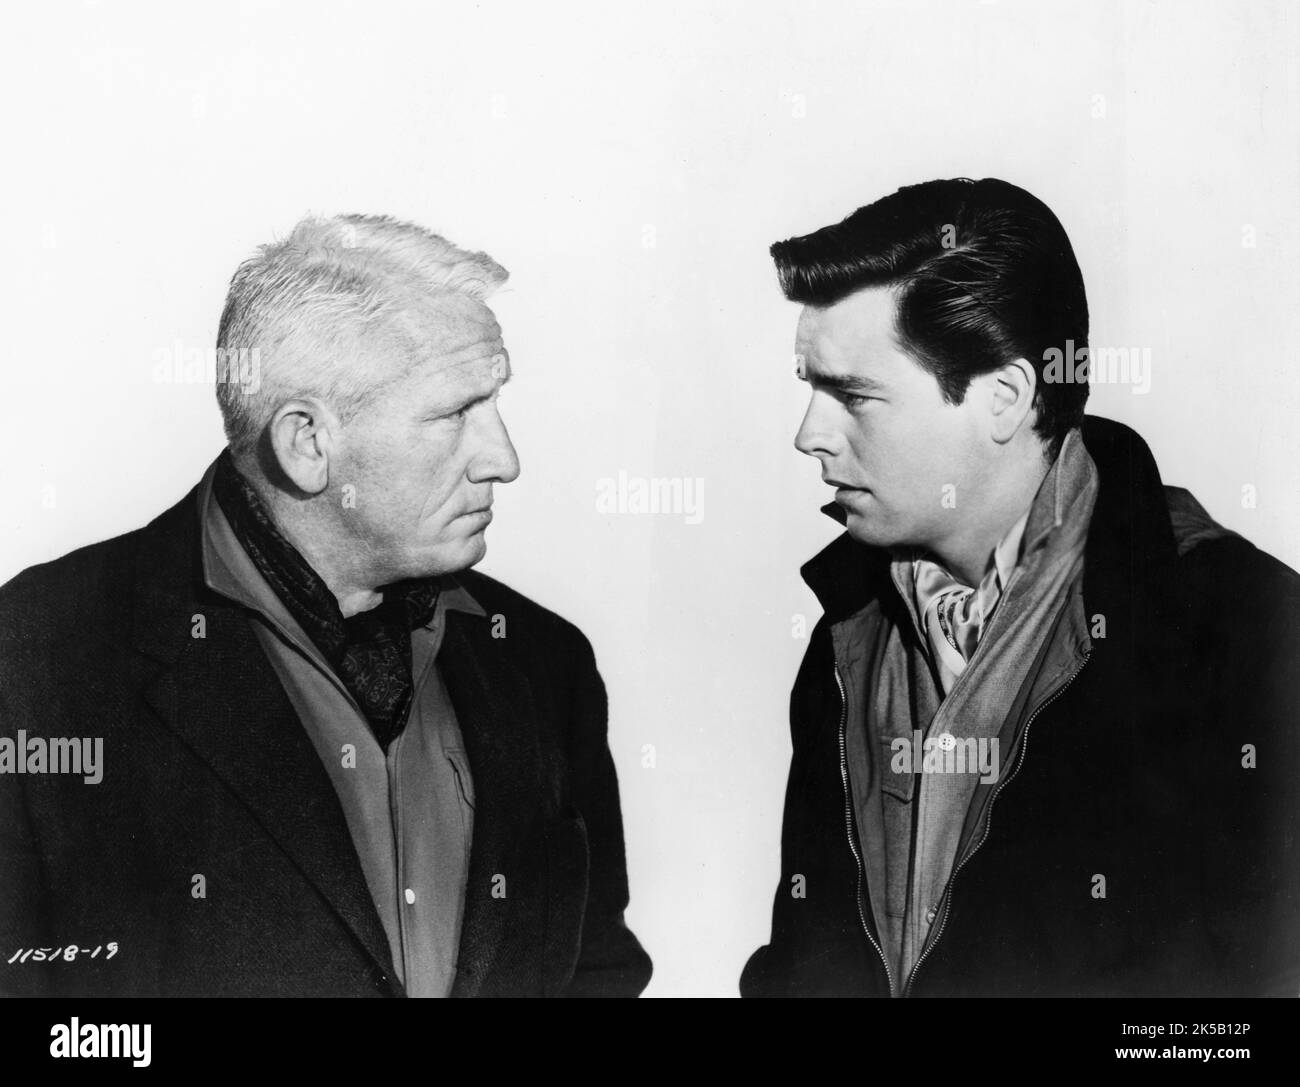 SPENCER TRACY and ROBERT WAGNER portrait in THE MOUNTAIN 1956 director / producer EDWARD DMYTRYK novel Henri Troyat Paramount Pictures Stock Photo